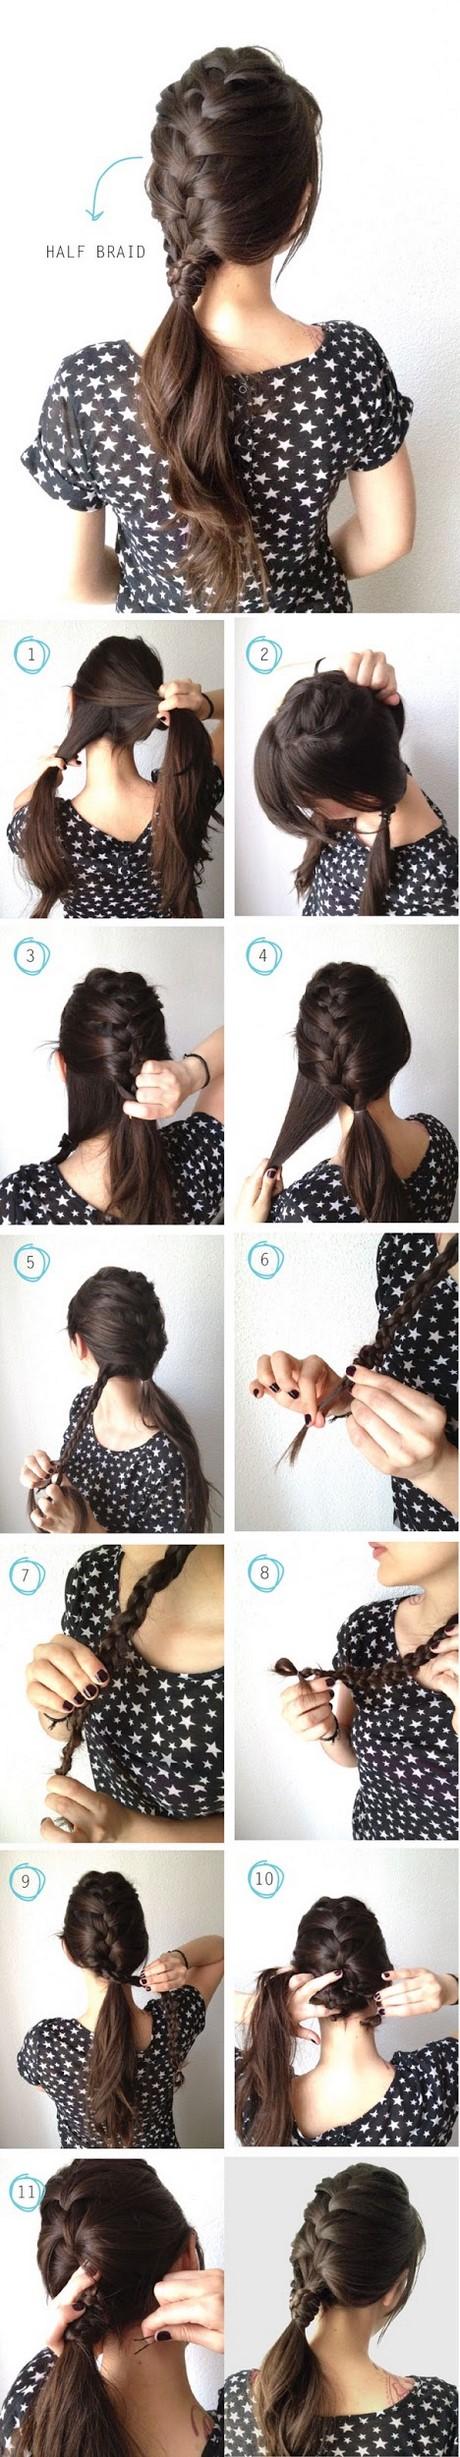 Ways to get your hair braided ways-to-get-your-hair-braided-02_7